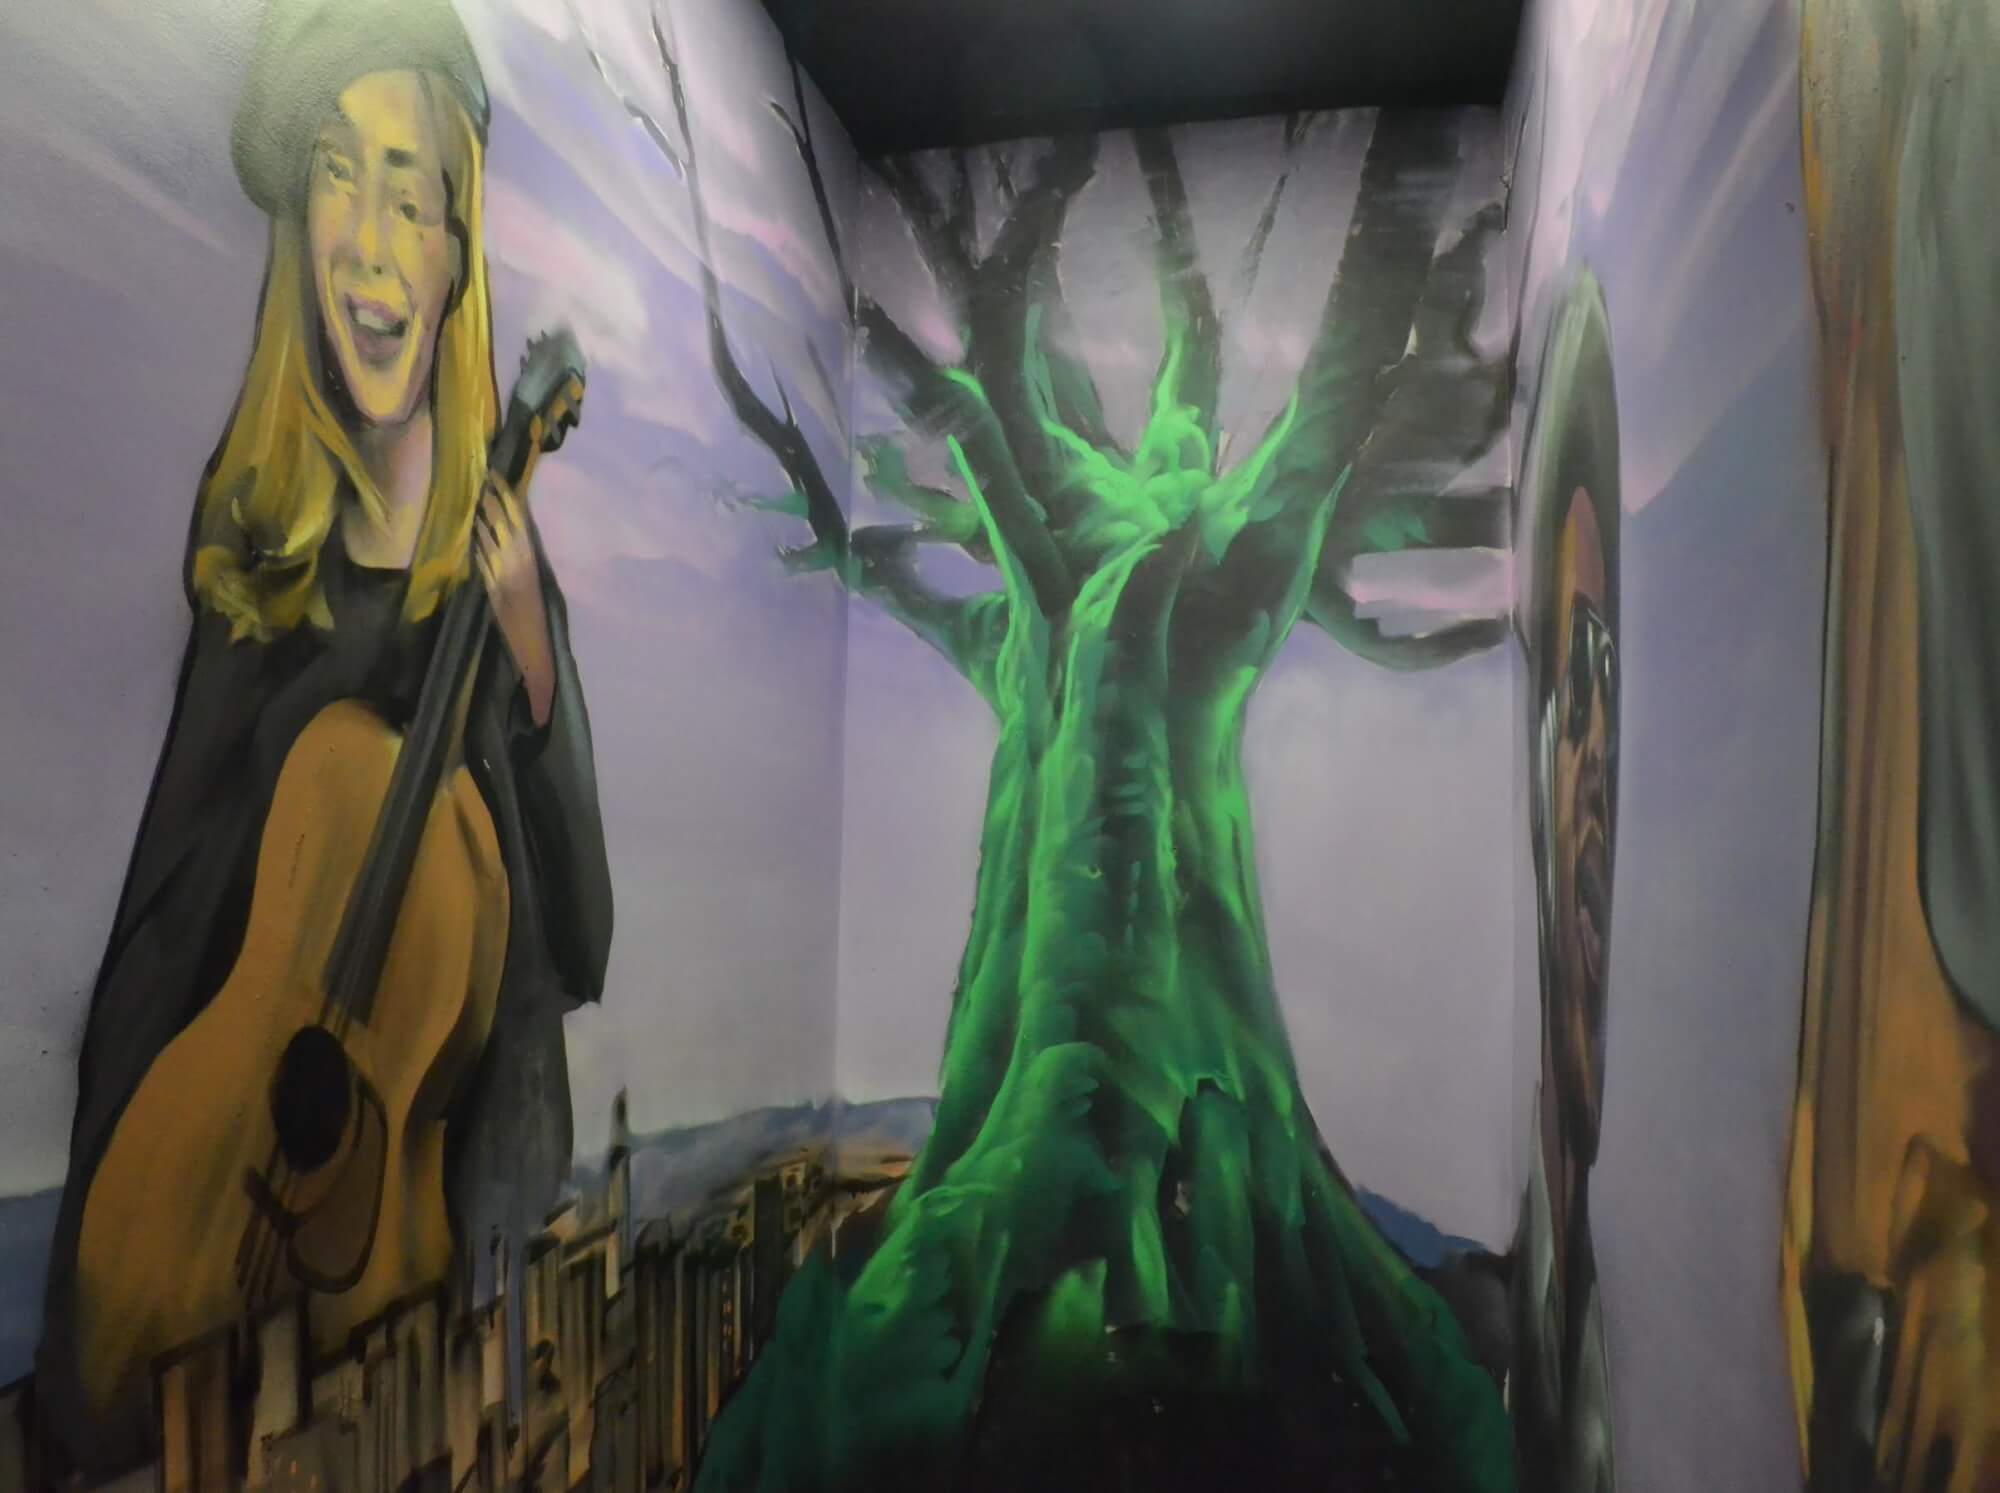 The outside of our venue space overlooks a mural of Joni Mitchell and the Tree of Life.